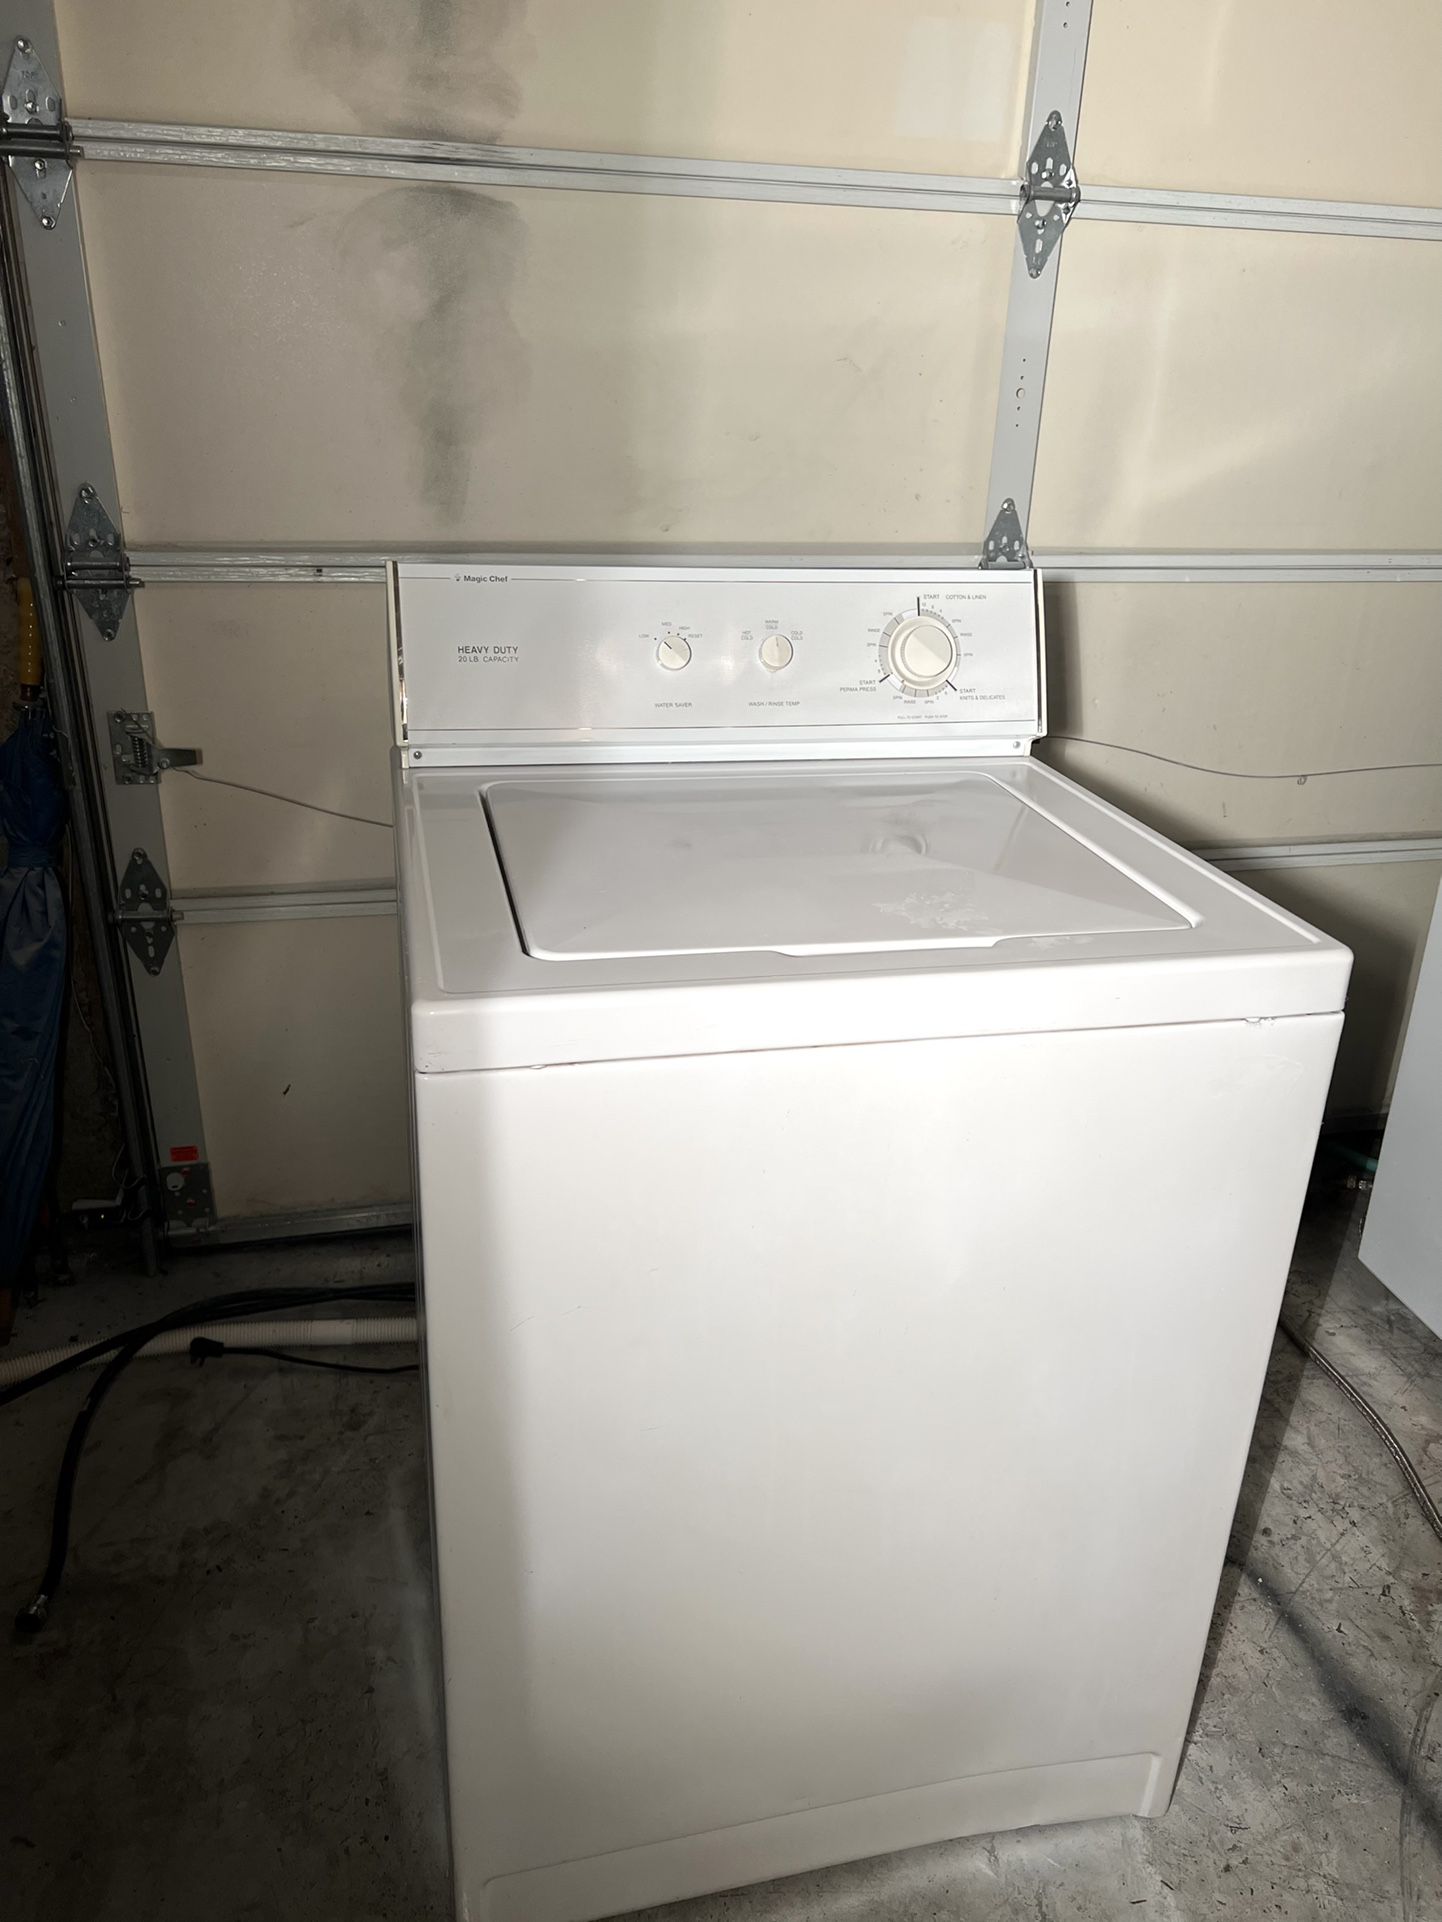 Magic Chef 0.9 Cu. Ft. Portable Washer (Laundry) for Sale in Sterling, VA -  OfferUp